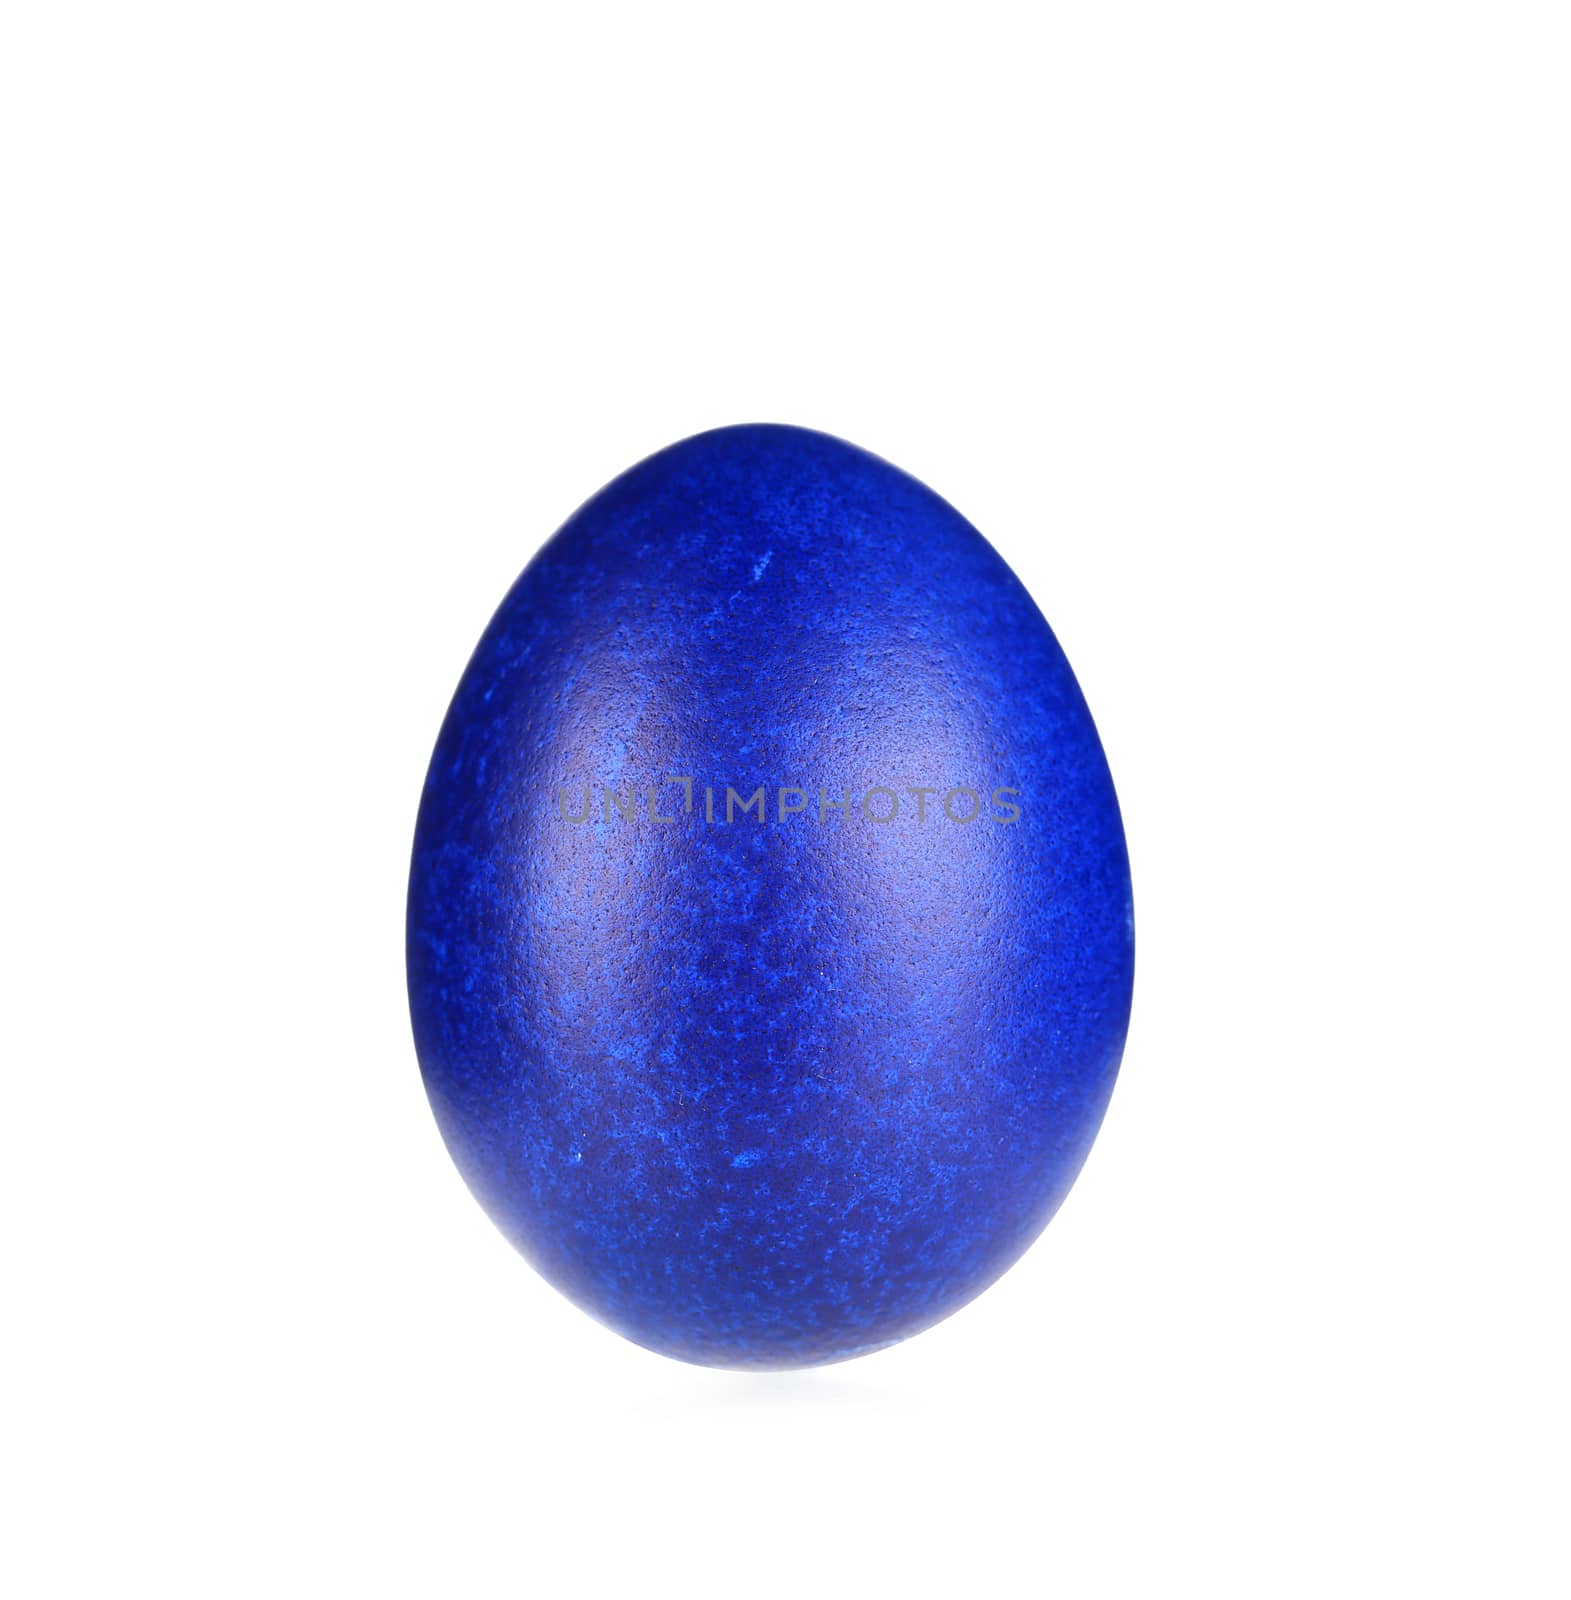 Close up of blue easter egg. by indigolotos